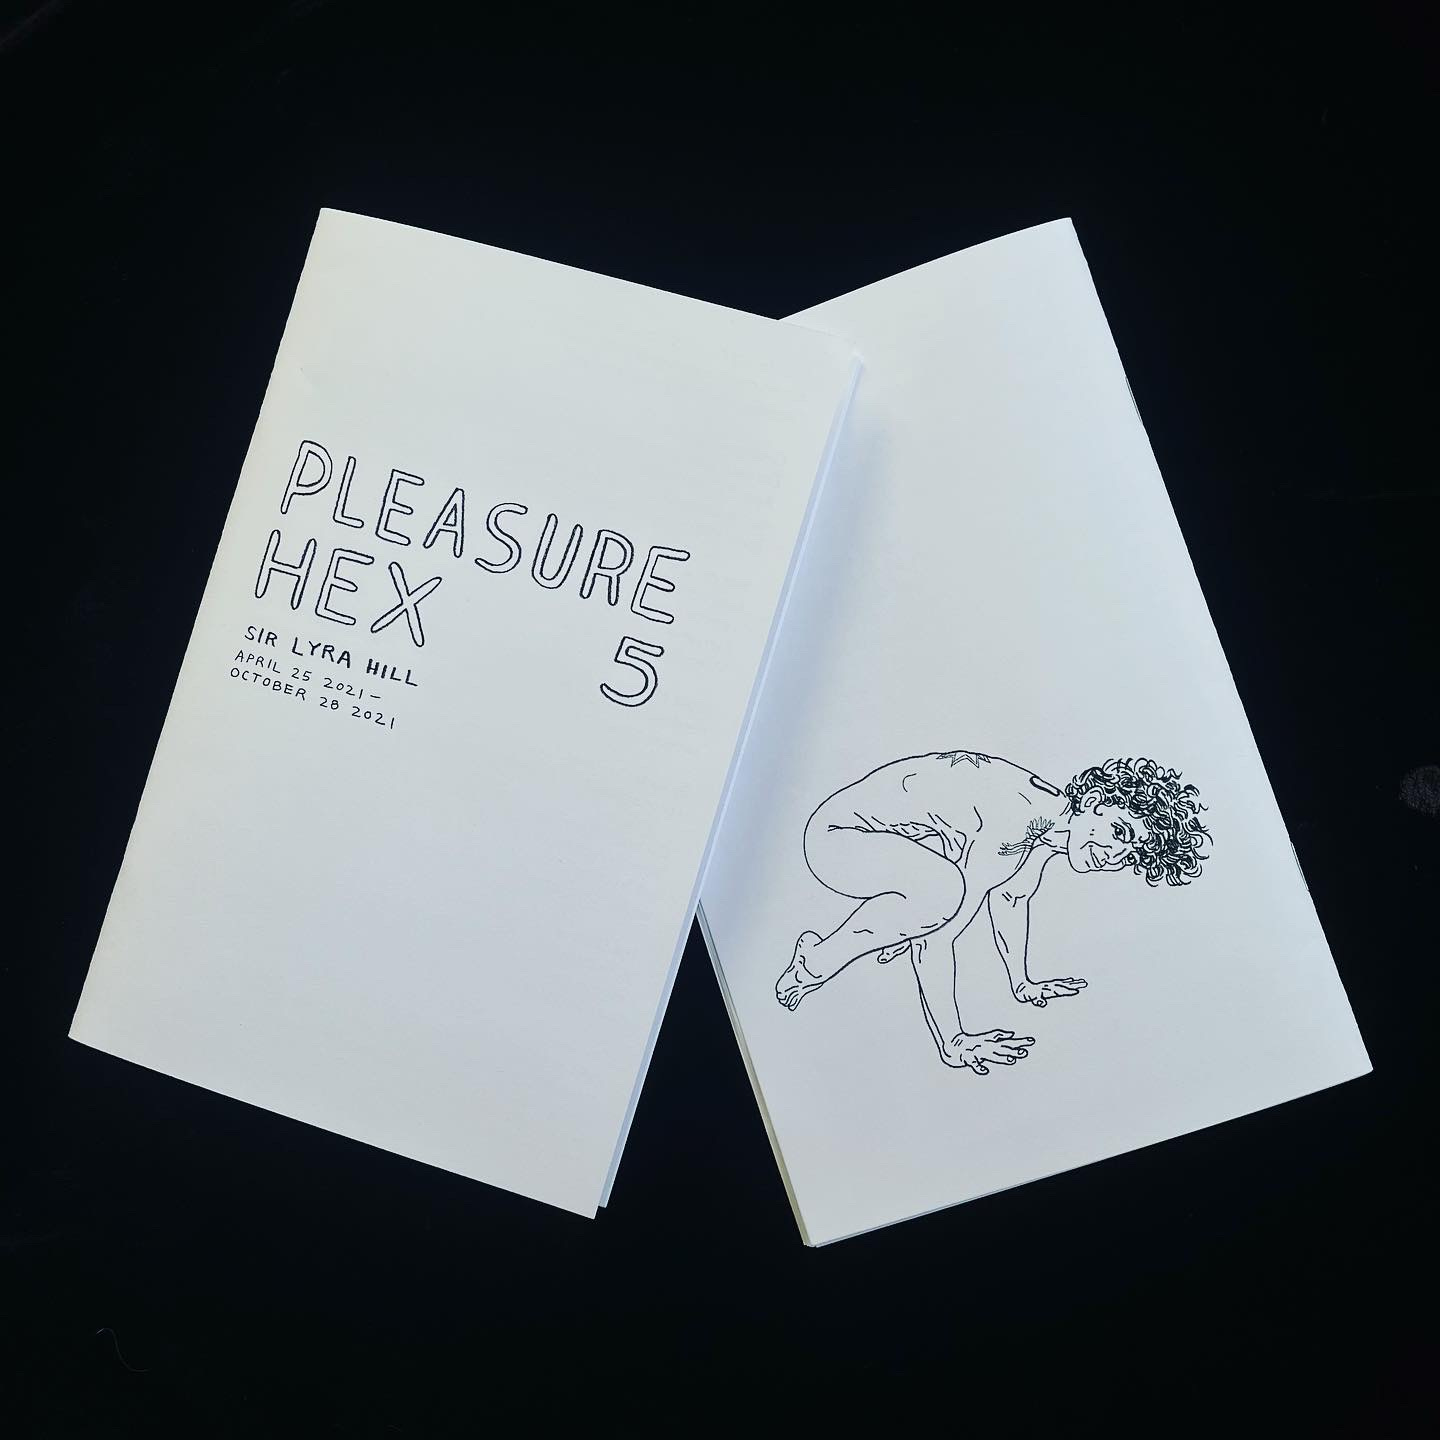 Two copies of the new zine, showing front and back covers.